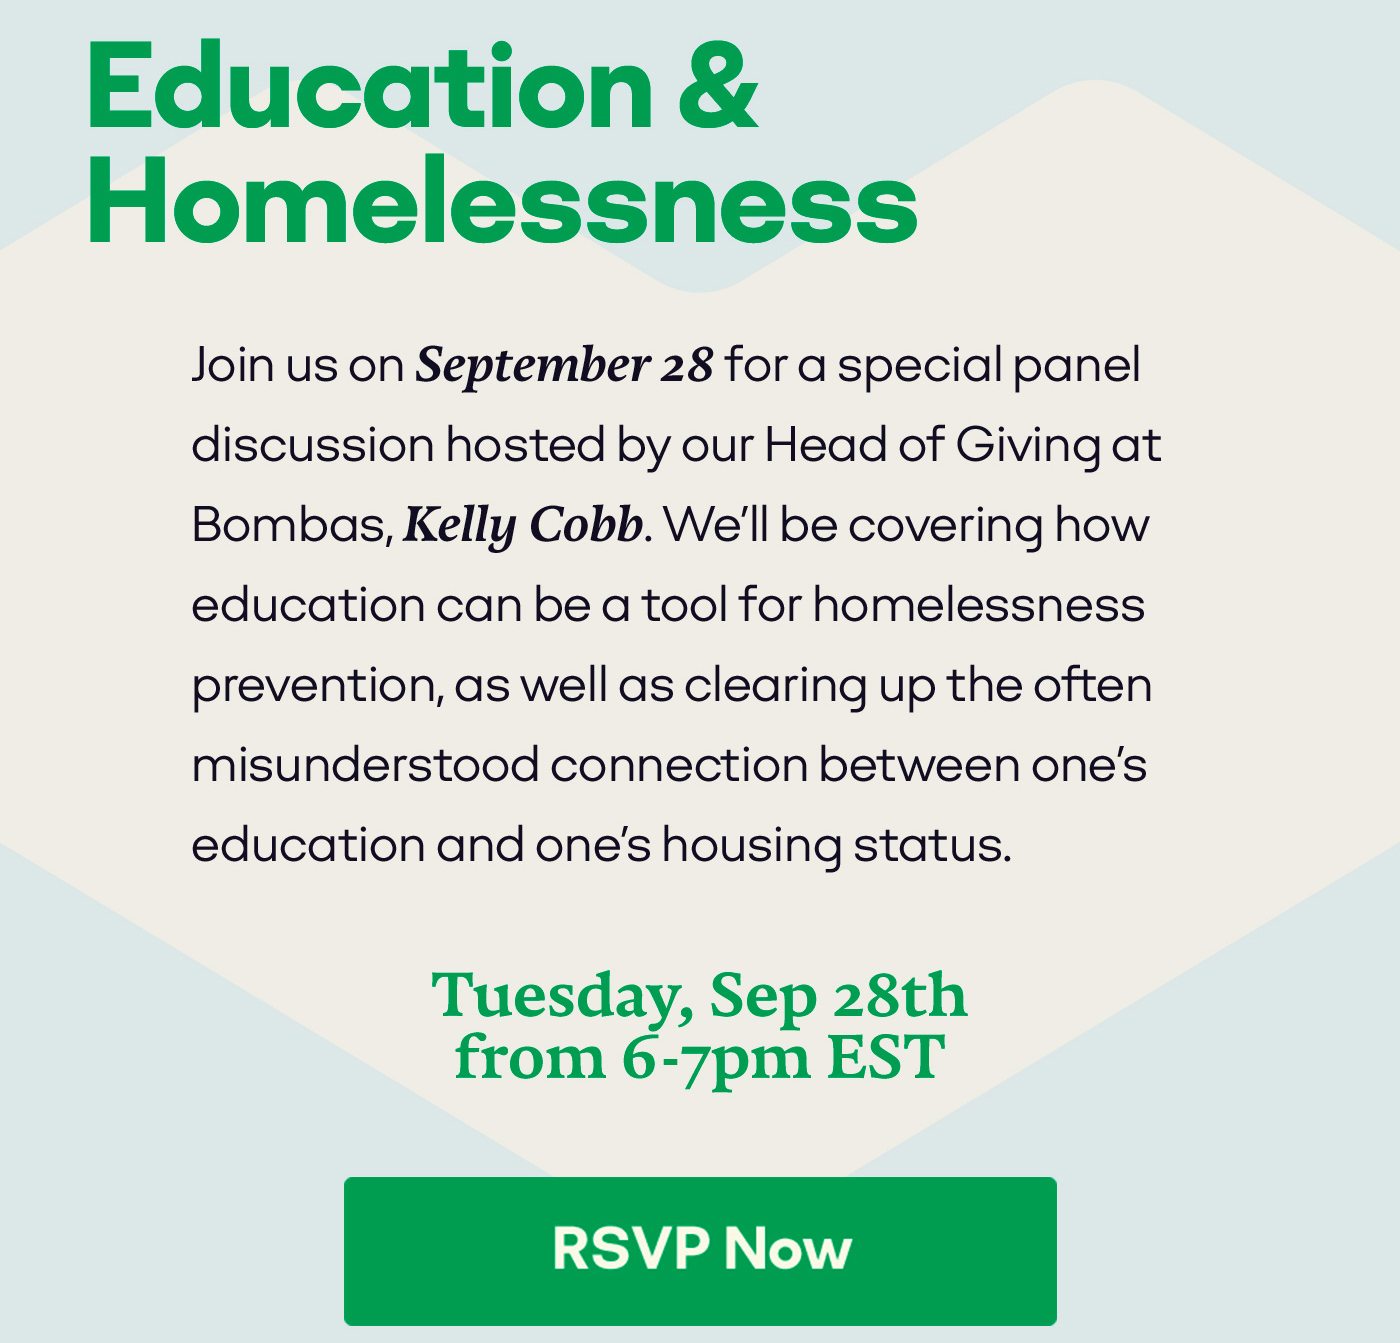 Education & Homelessness | Join us on September 28 for a special panel discussion hosted by our Head of Giving at Bombas, Kelly Cobb. We'll be covering how education can be a tool for homelessness prevention, as well as clearing up the often misunderstood connection between one's education and one's housing status. | Tuesday, Sep 28th from 6-7pm EST | [RSVP Now]